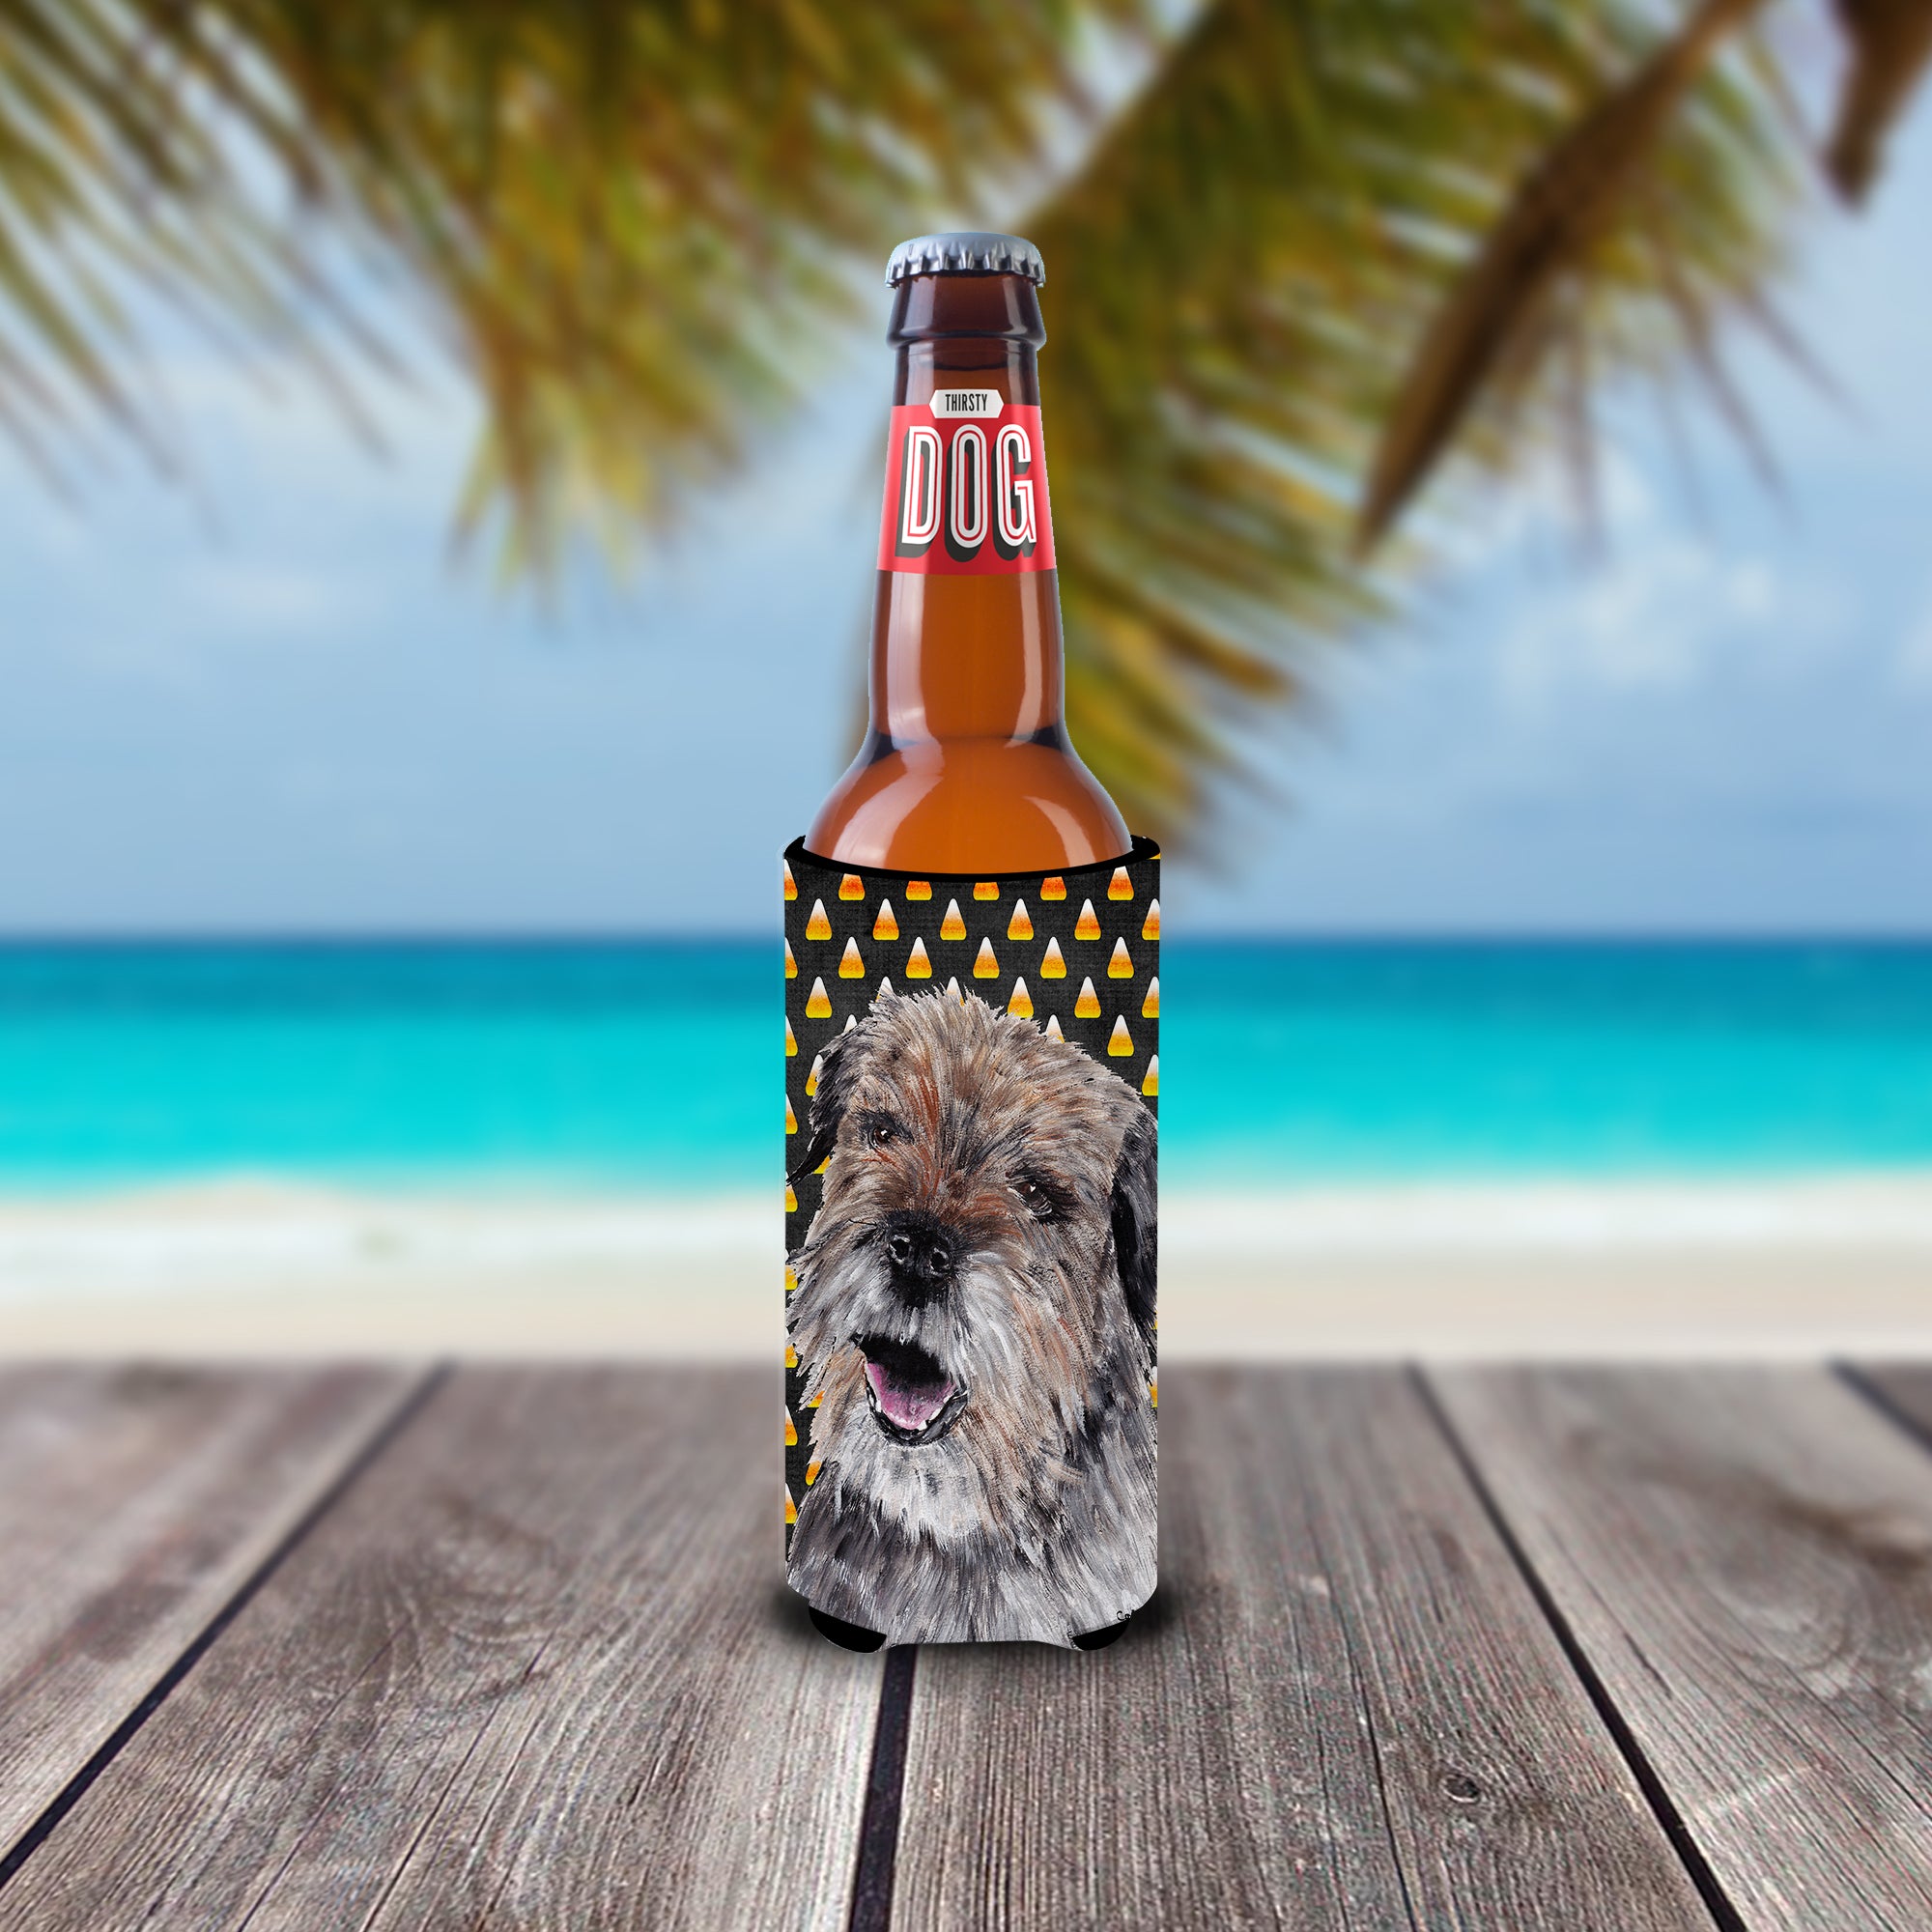 Border Terrier Halloween Candy Corn Ultra Beverage Insulators for slim cans.